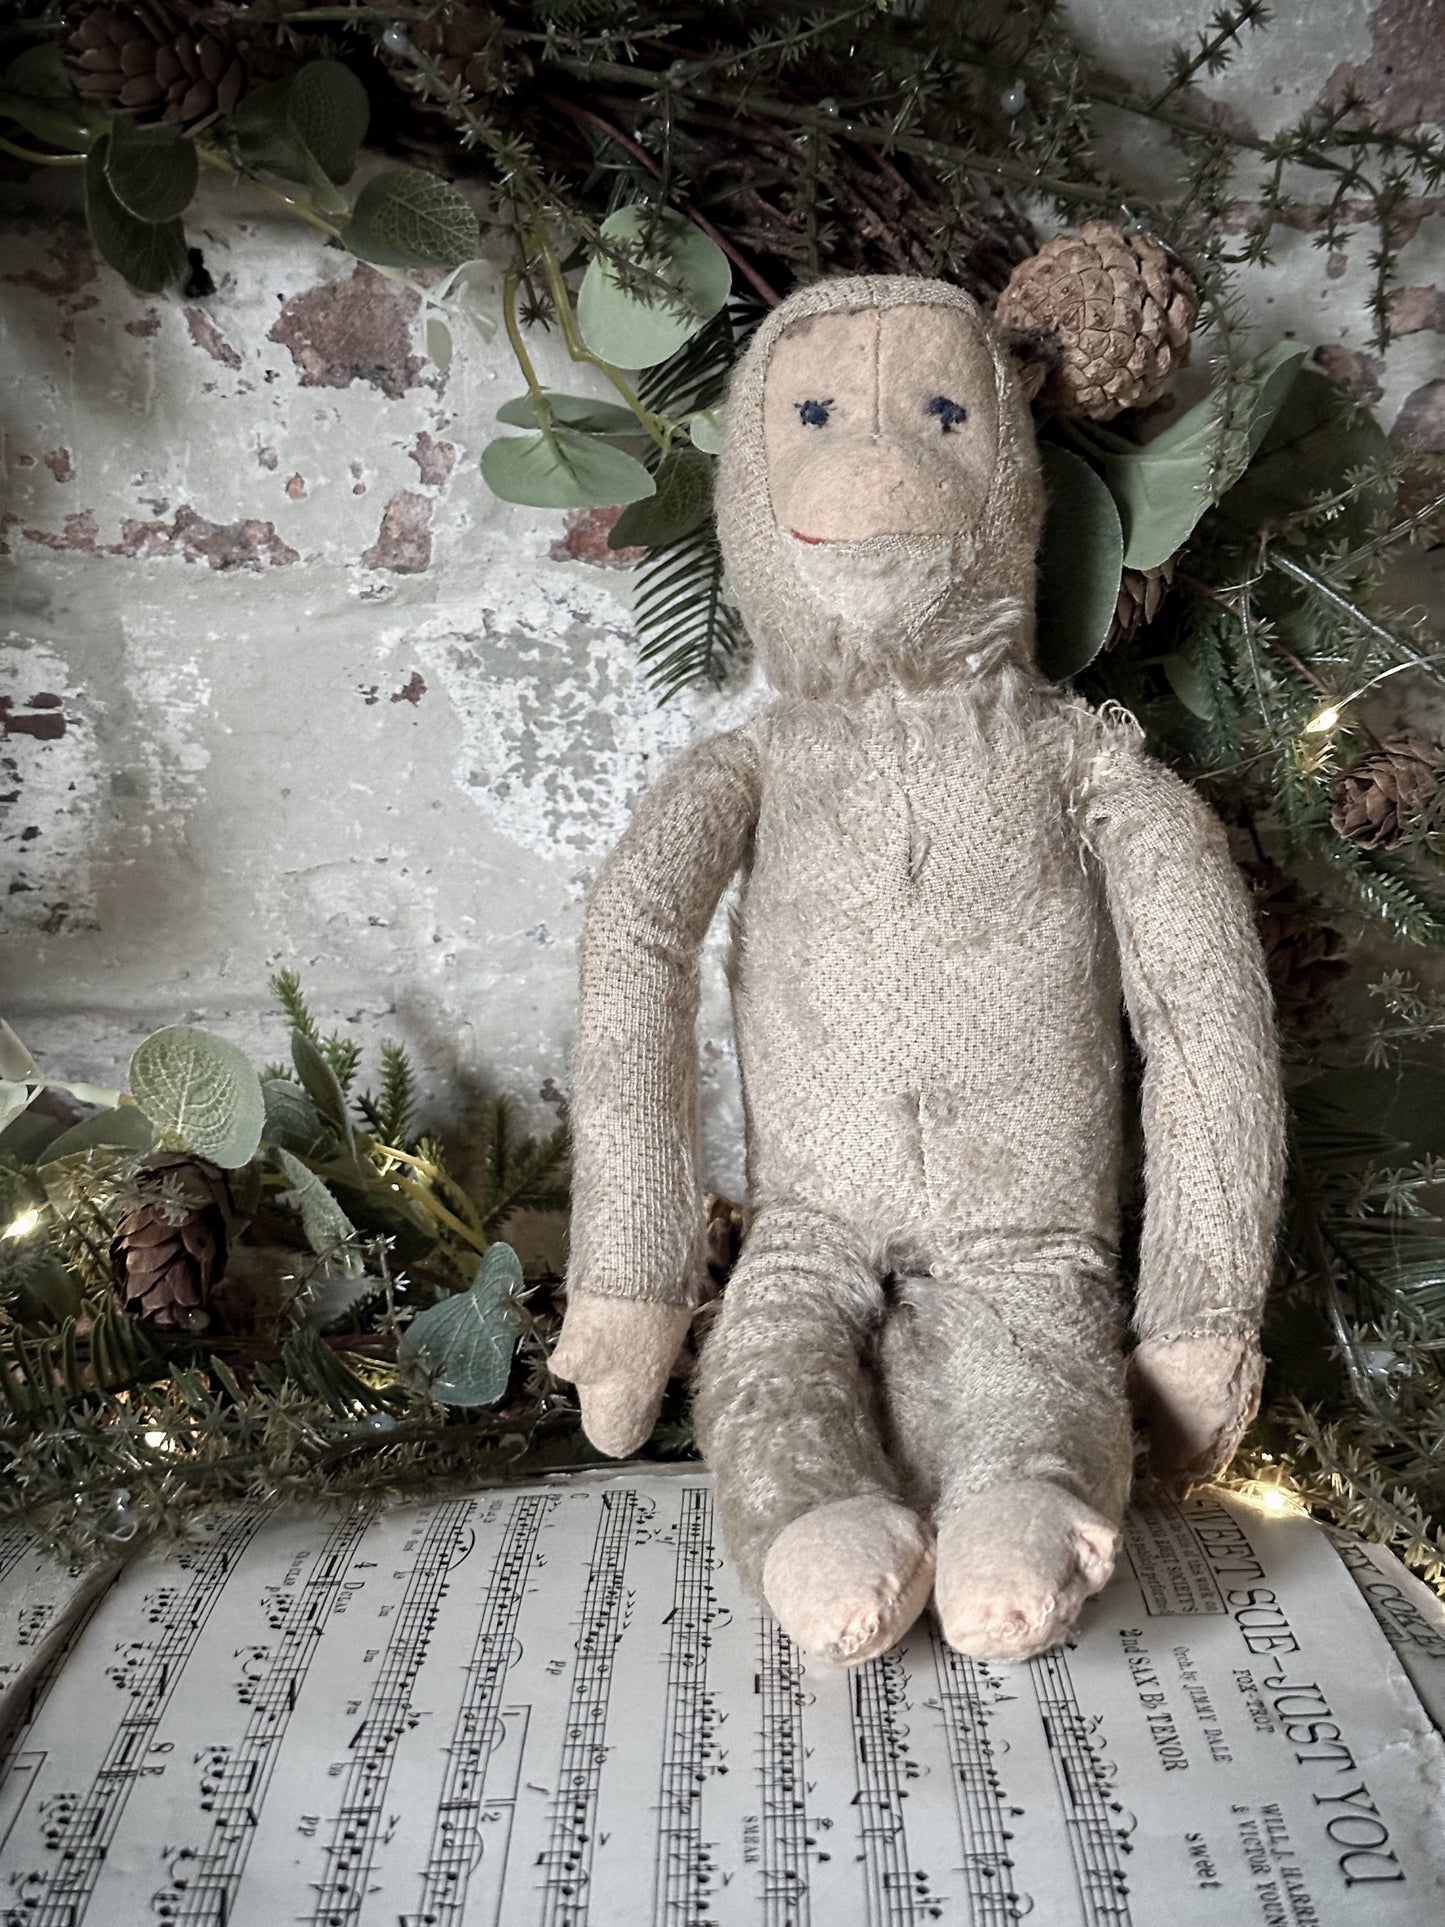 A lovely antique mohair monkey toy